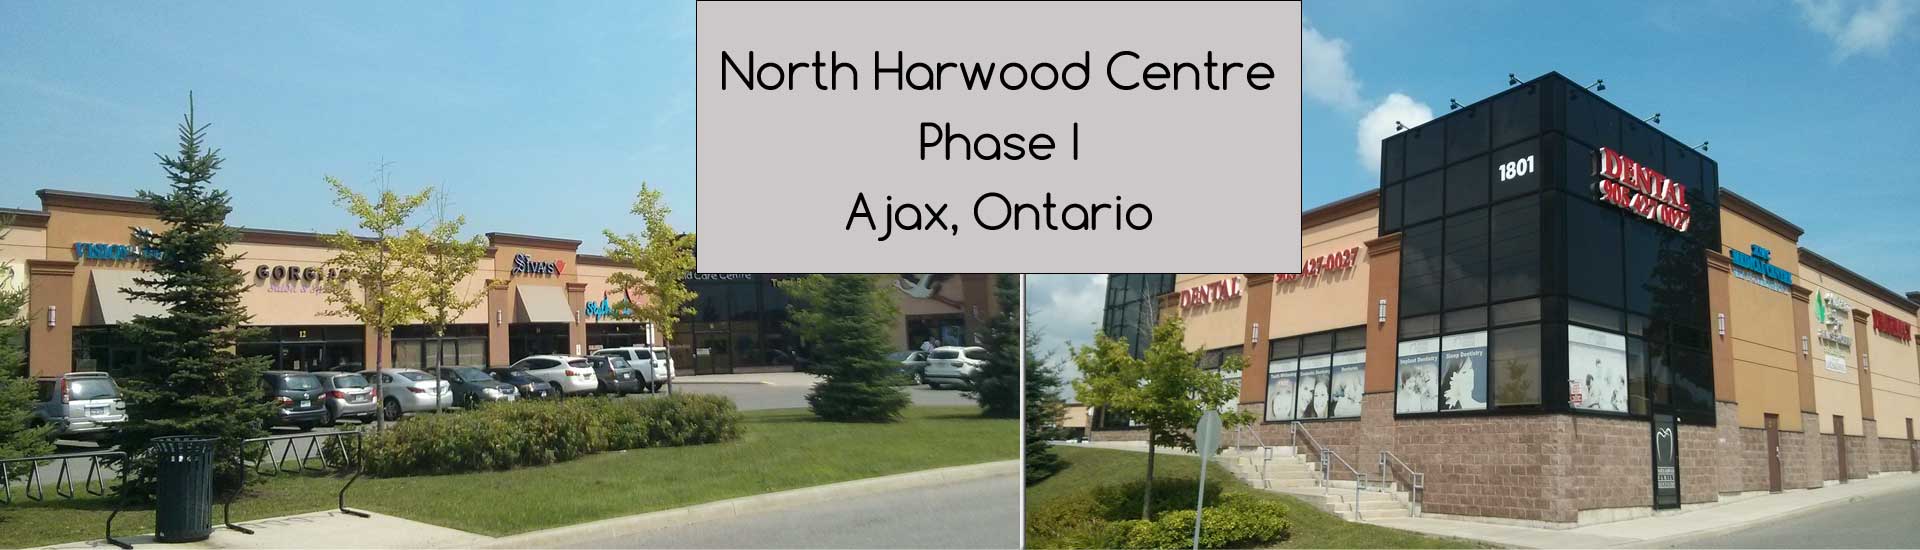 Commercial Plaza North Harwood Centre, Ajax, Ontario